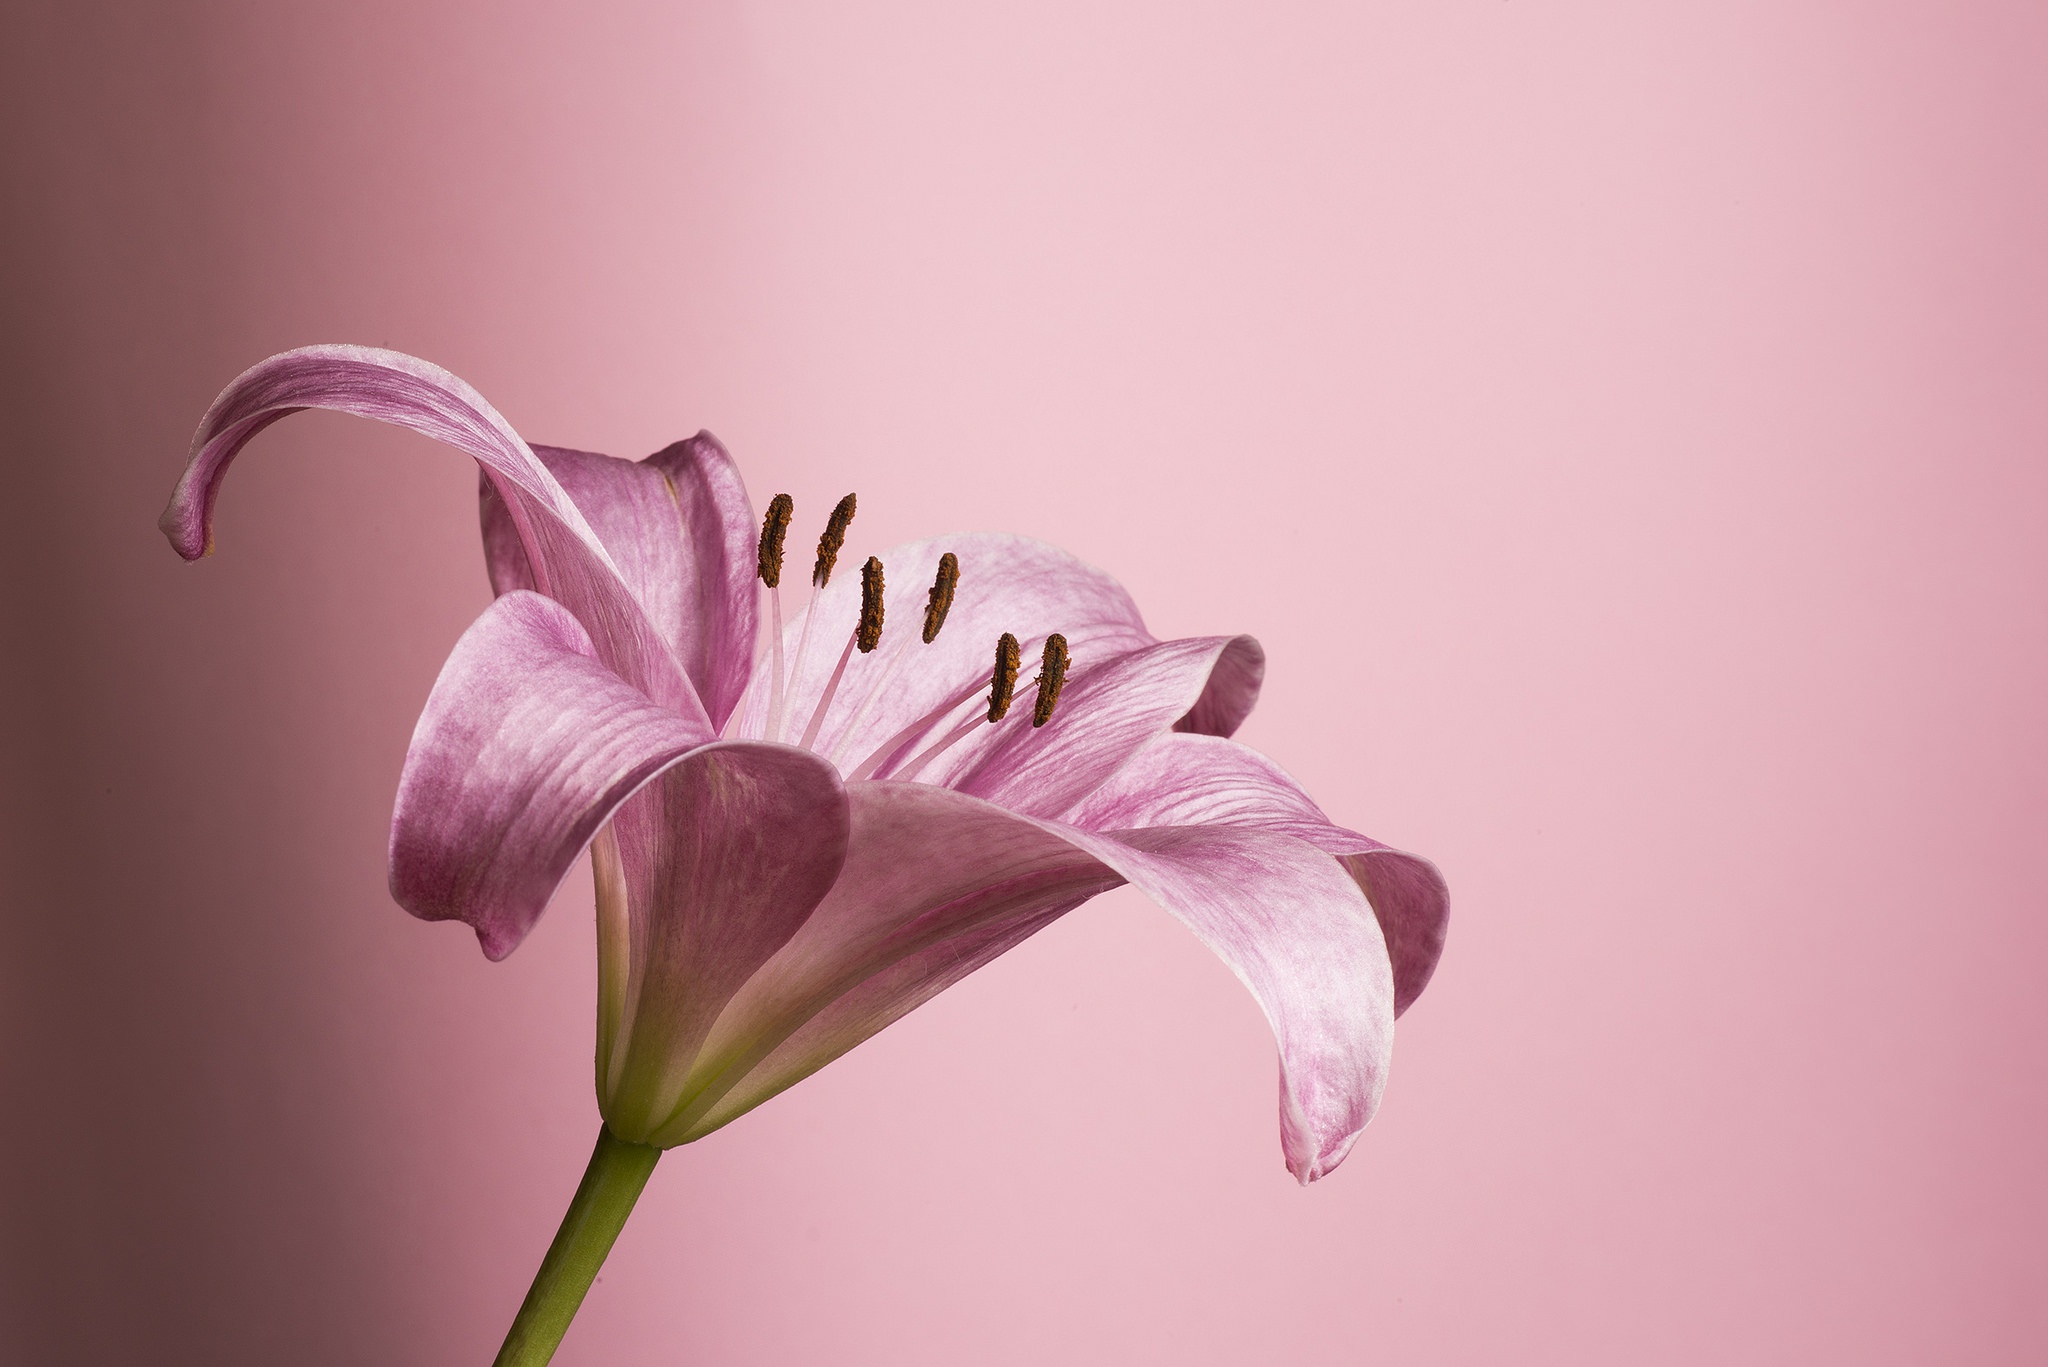 Flower Lily Pink Flower 2048x1367.